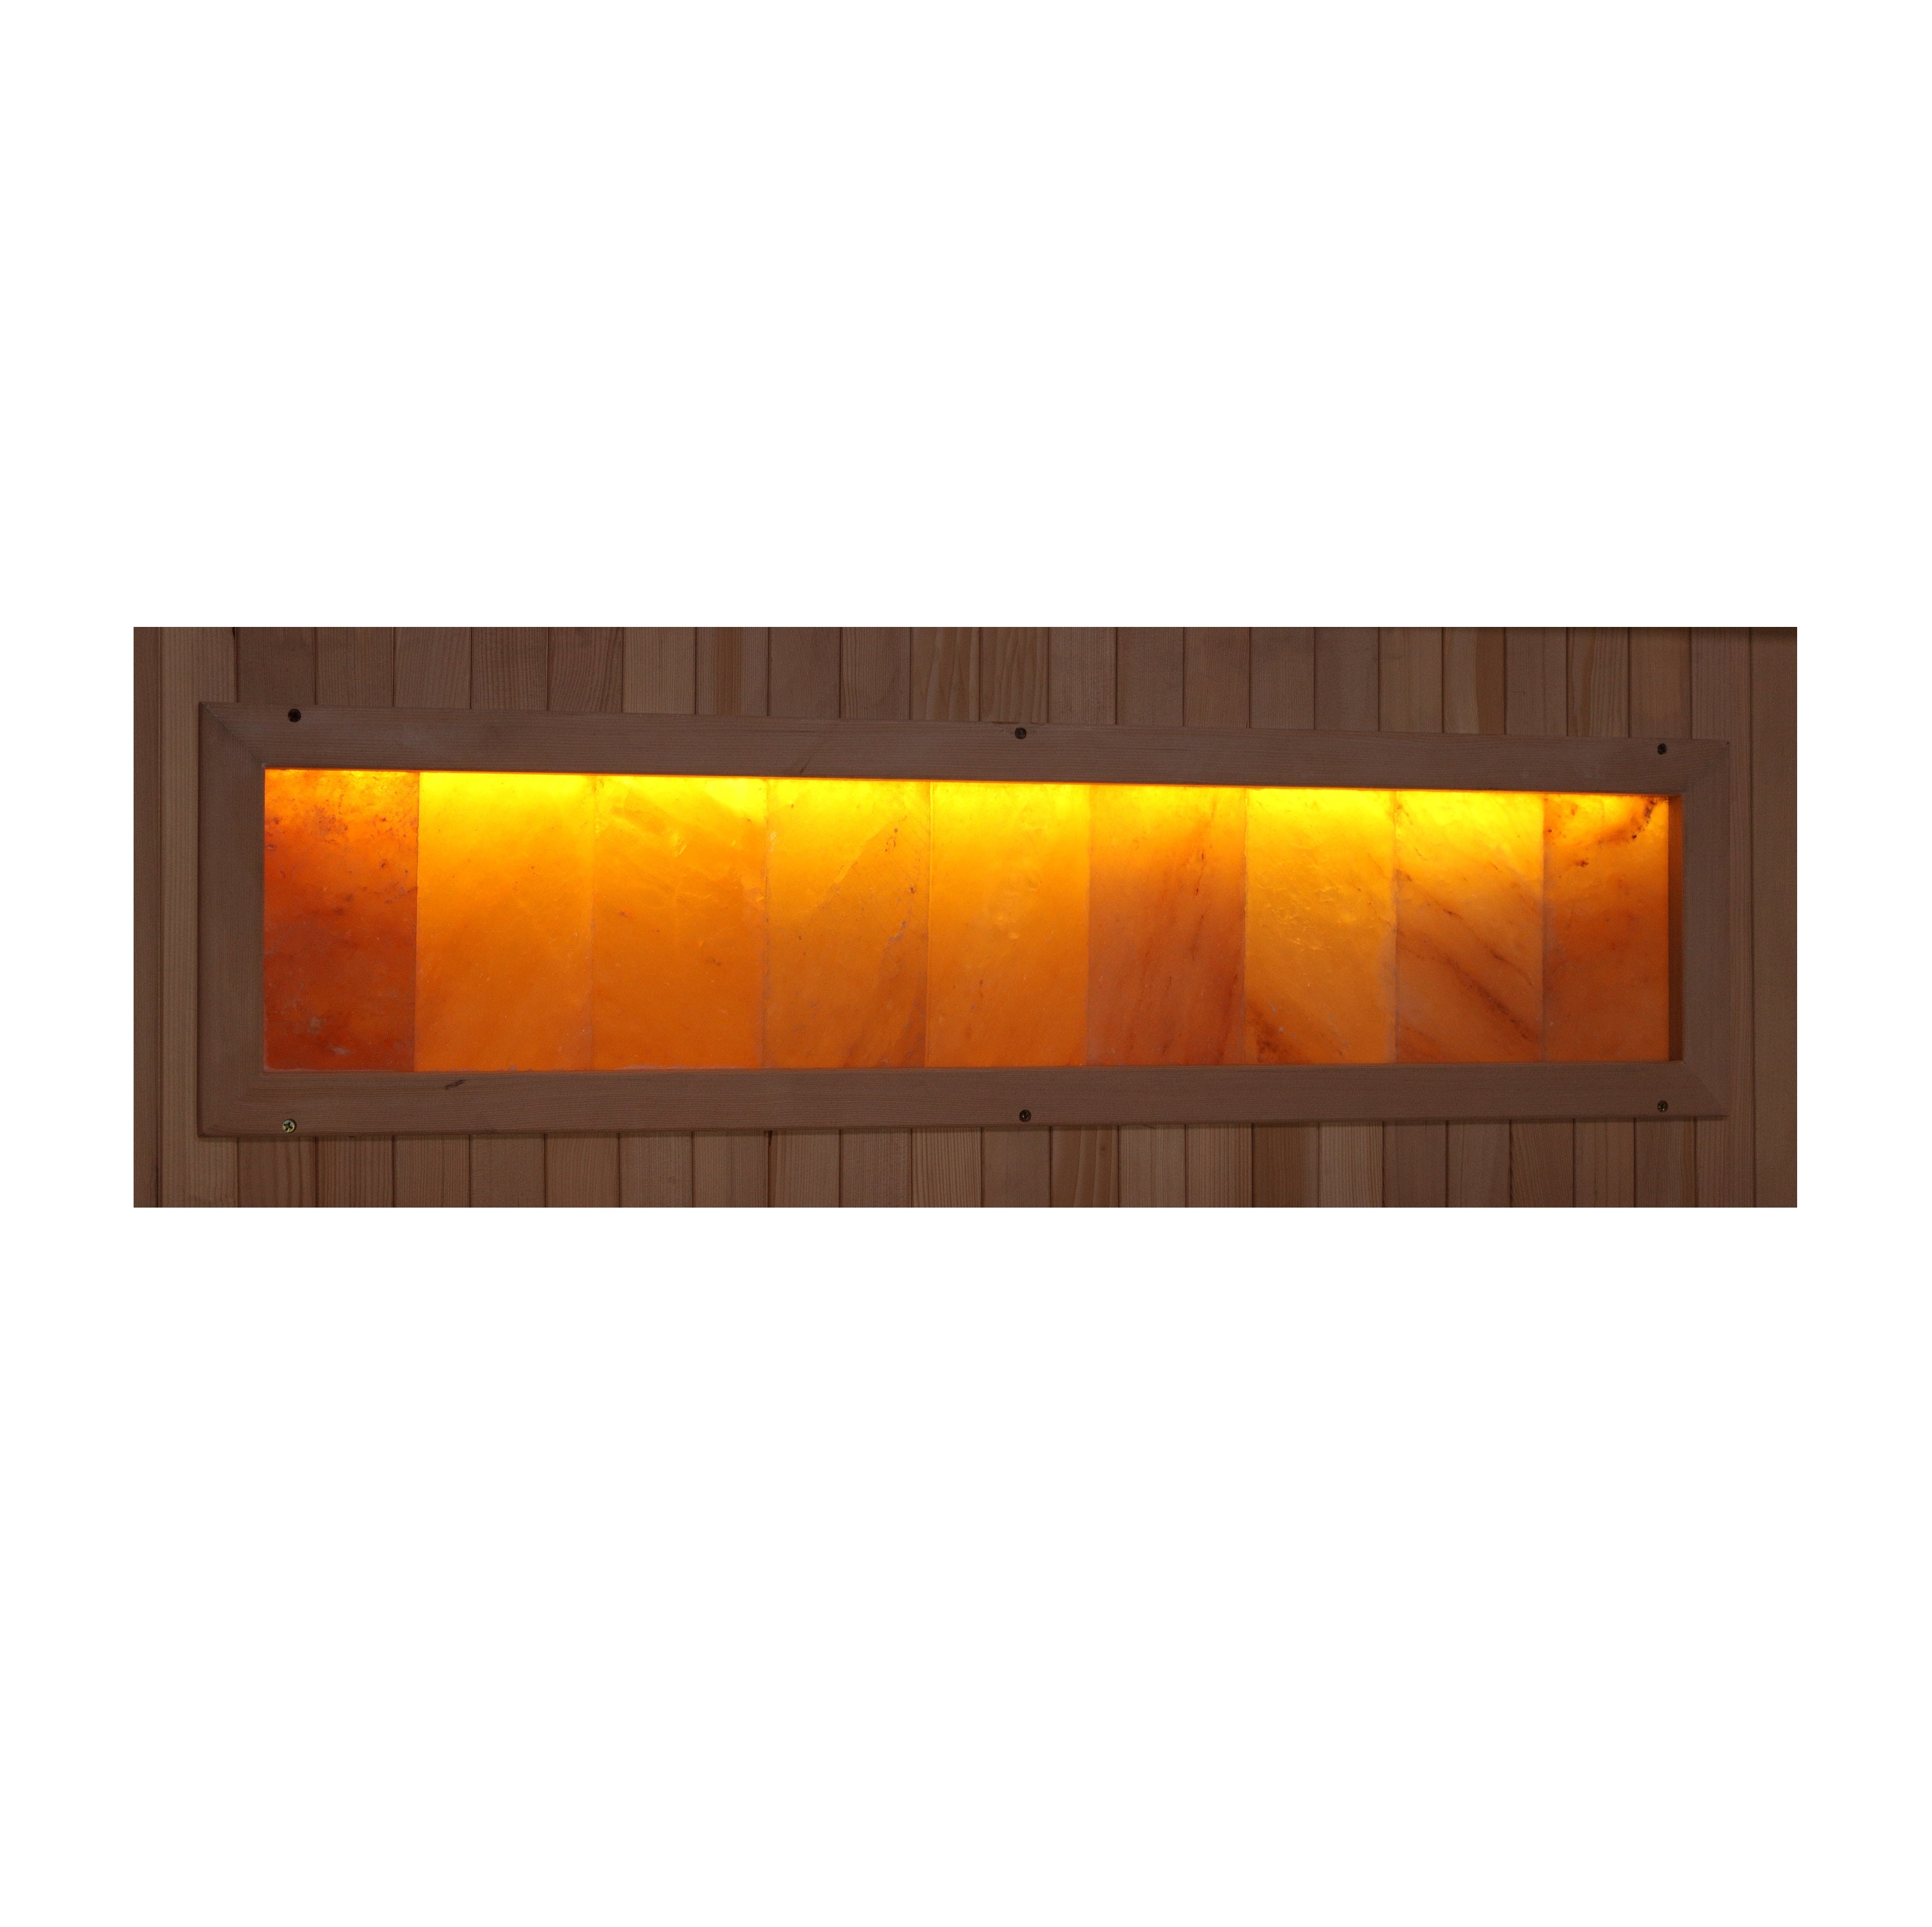 ***New 2022 Collection*** Reserve Edition GDI-8035-02 Full Spectrum with Himalayan Salt Bar